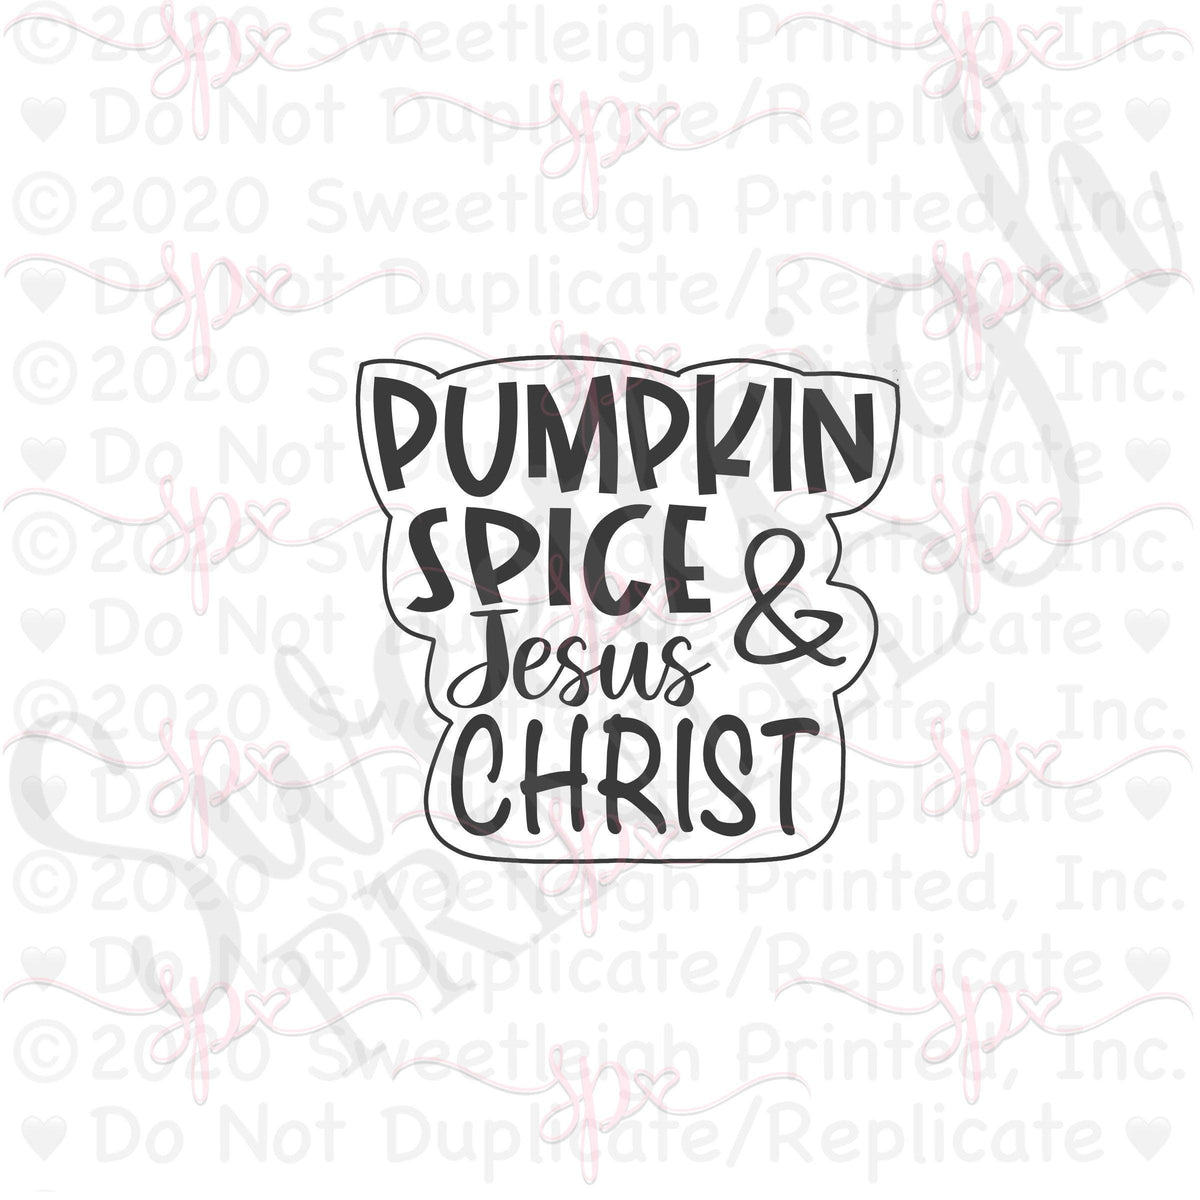 Pumpkin Spice and Jesus Christ Hand Lettered Cookie Cutter - Sweetleigh 